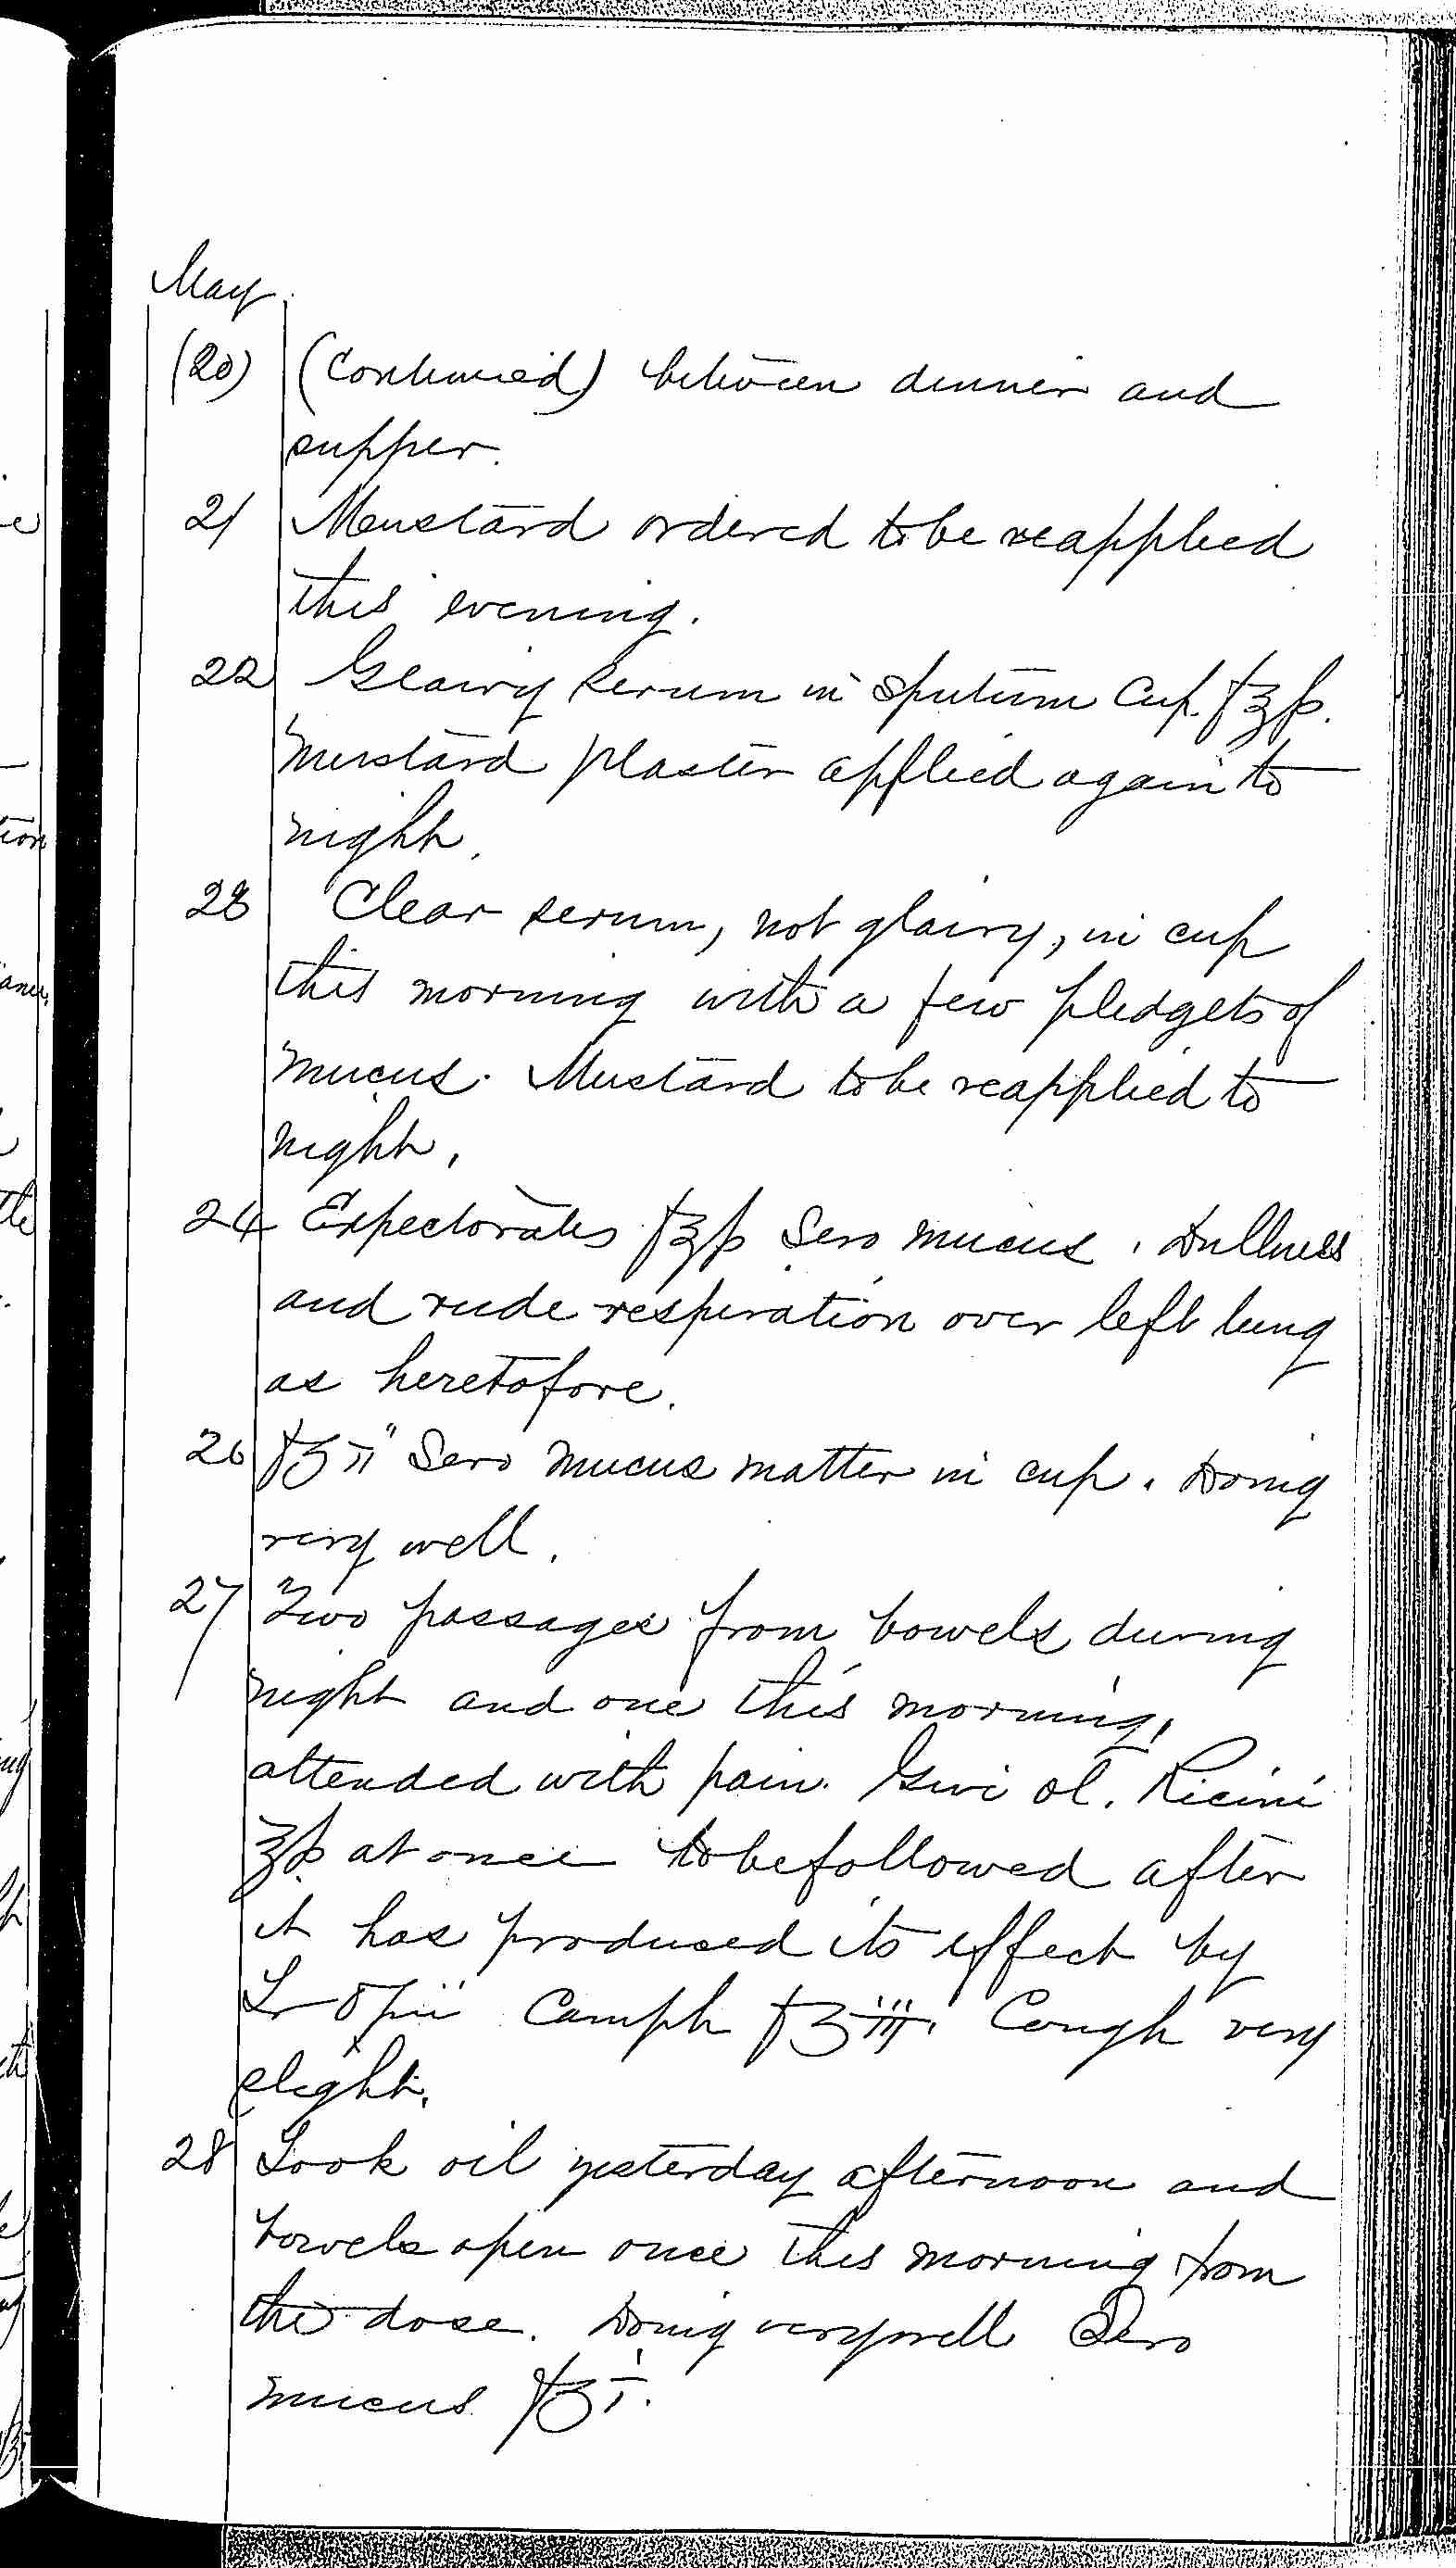 Entry for Peter C. Cheeks (page 15 of 16) in the log Hospital Tickets and Case Papers - Naval Hospital - Washington, D.C. - 1868-69